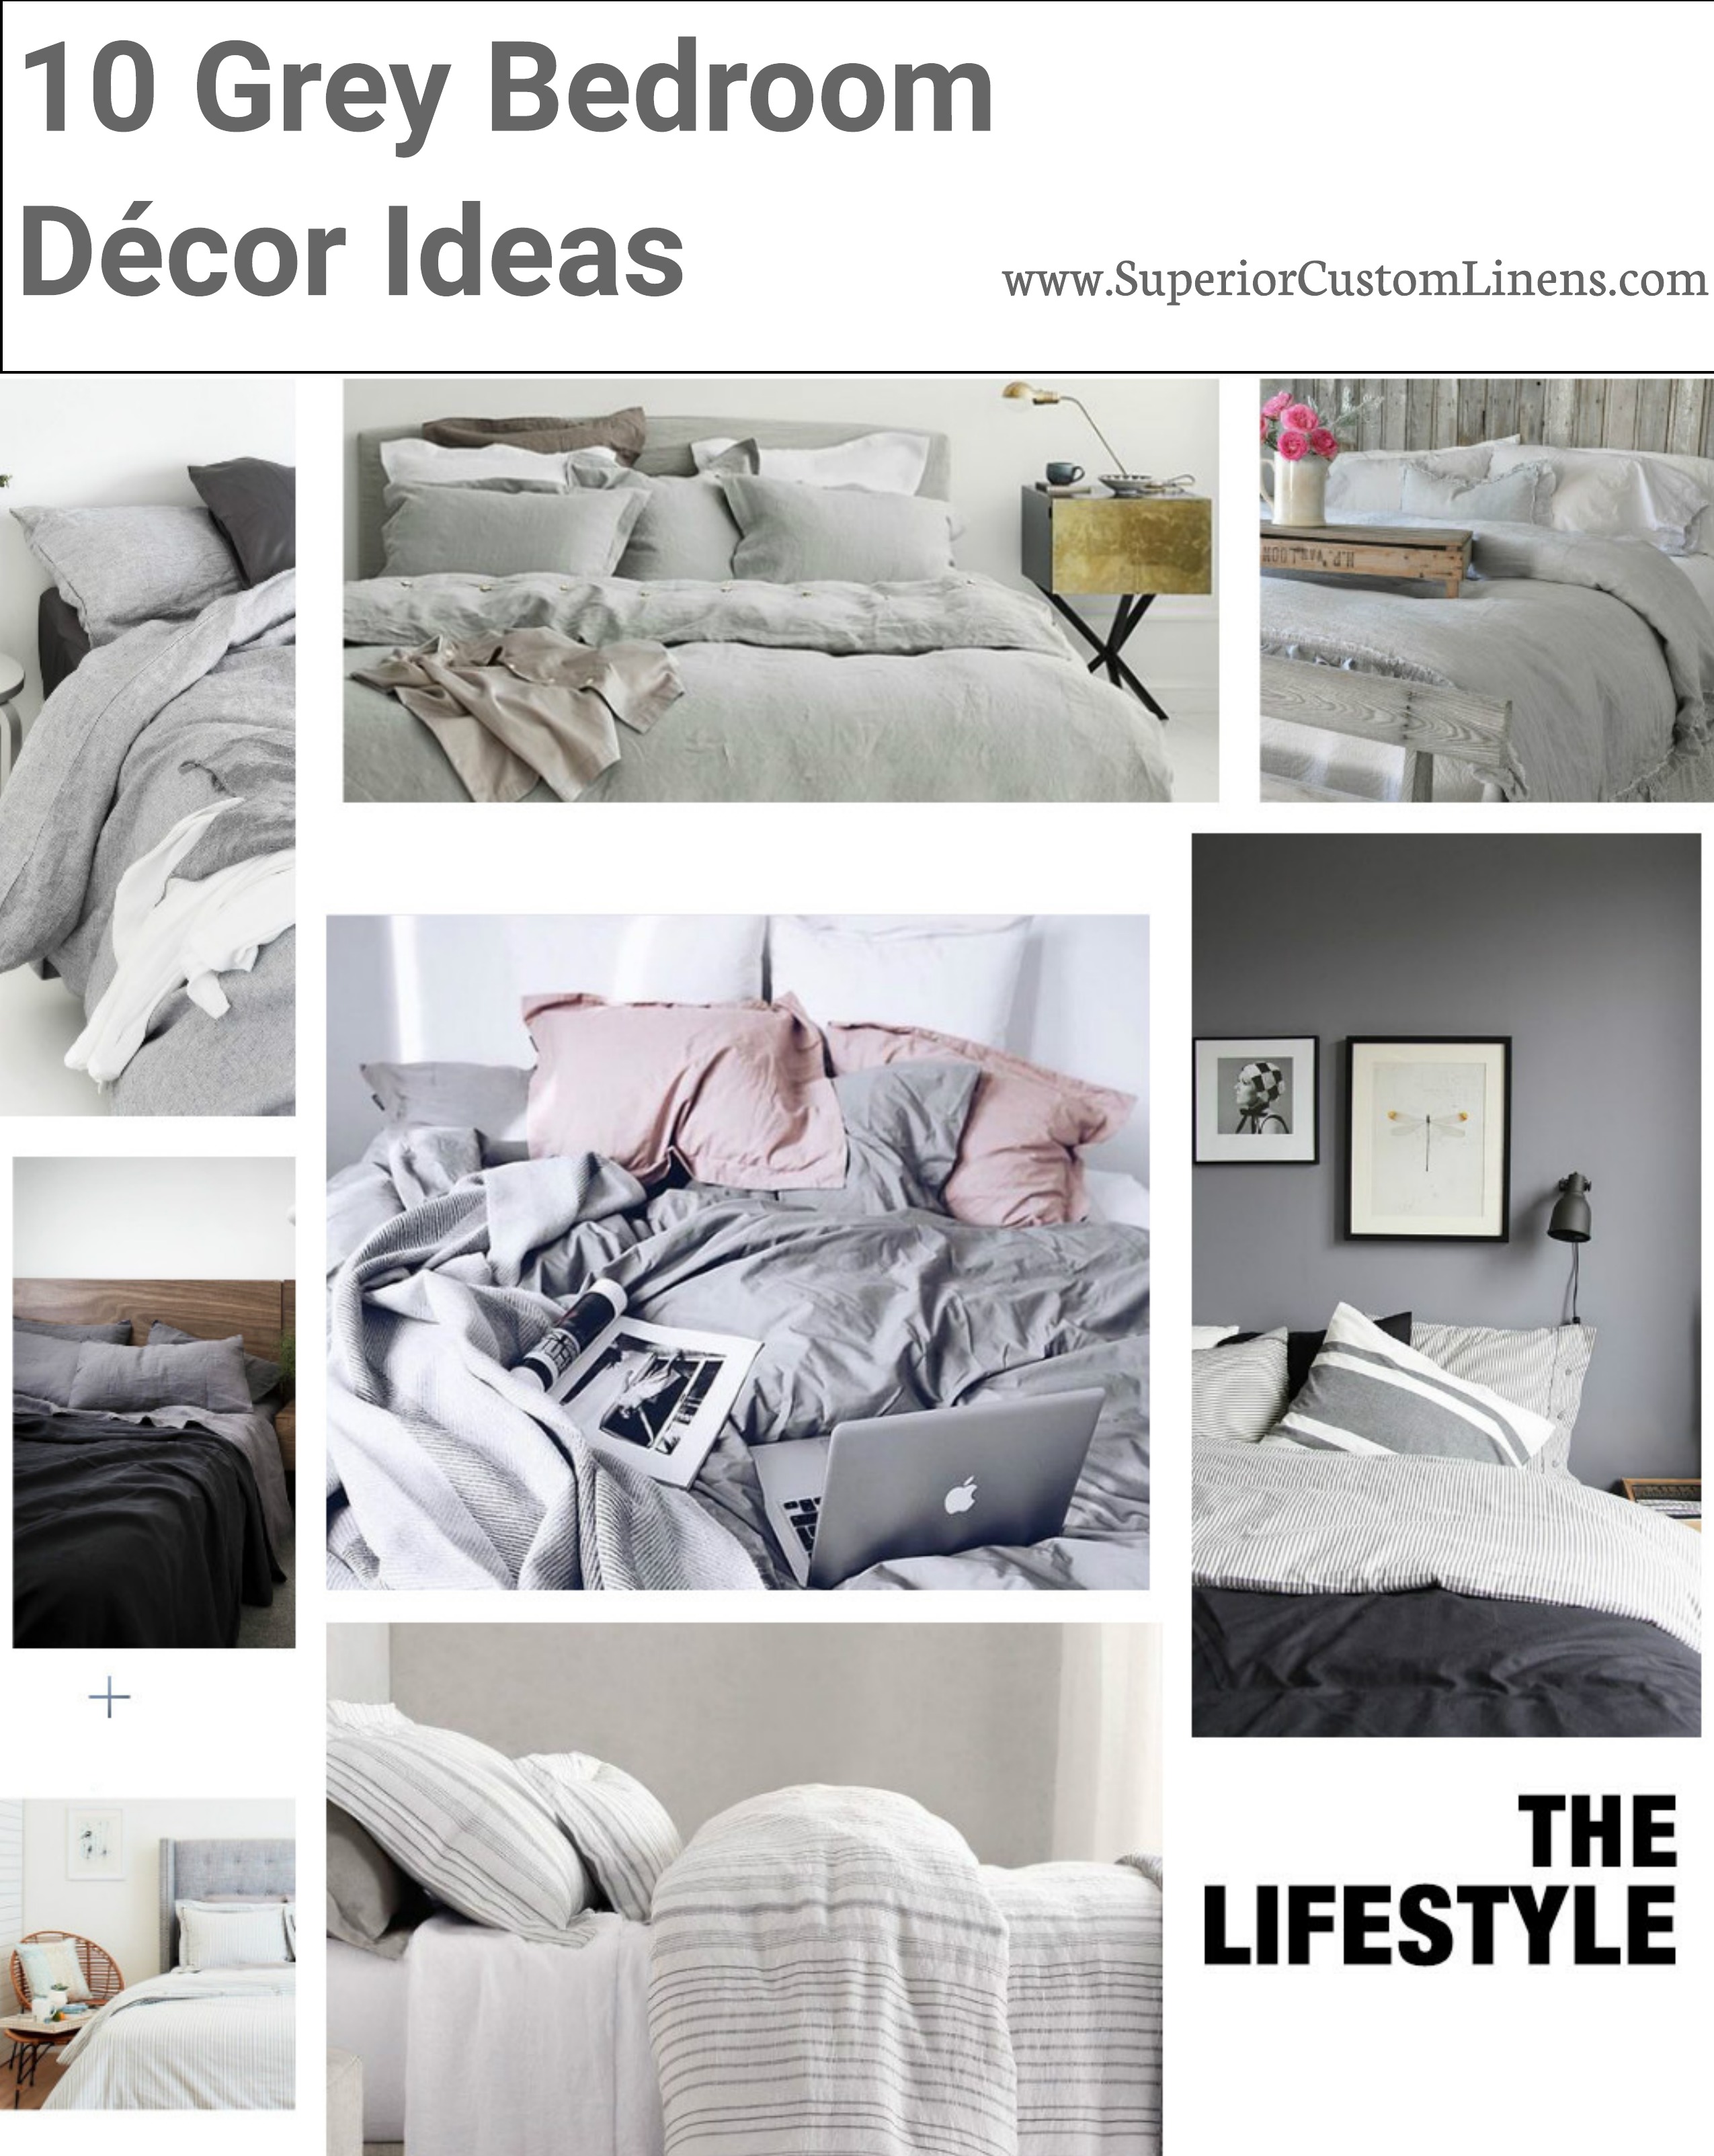 https://www.superiorcustomlinens.com/product_images/uploaded_images/10-coastal-inspired-bedrooms-untitled-page.jpeg